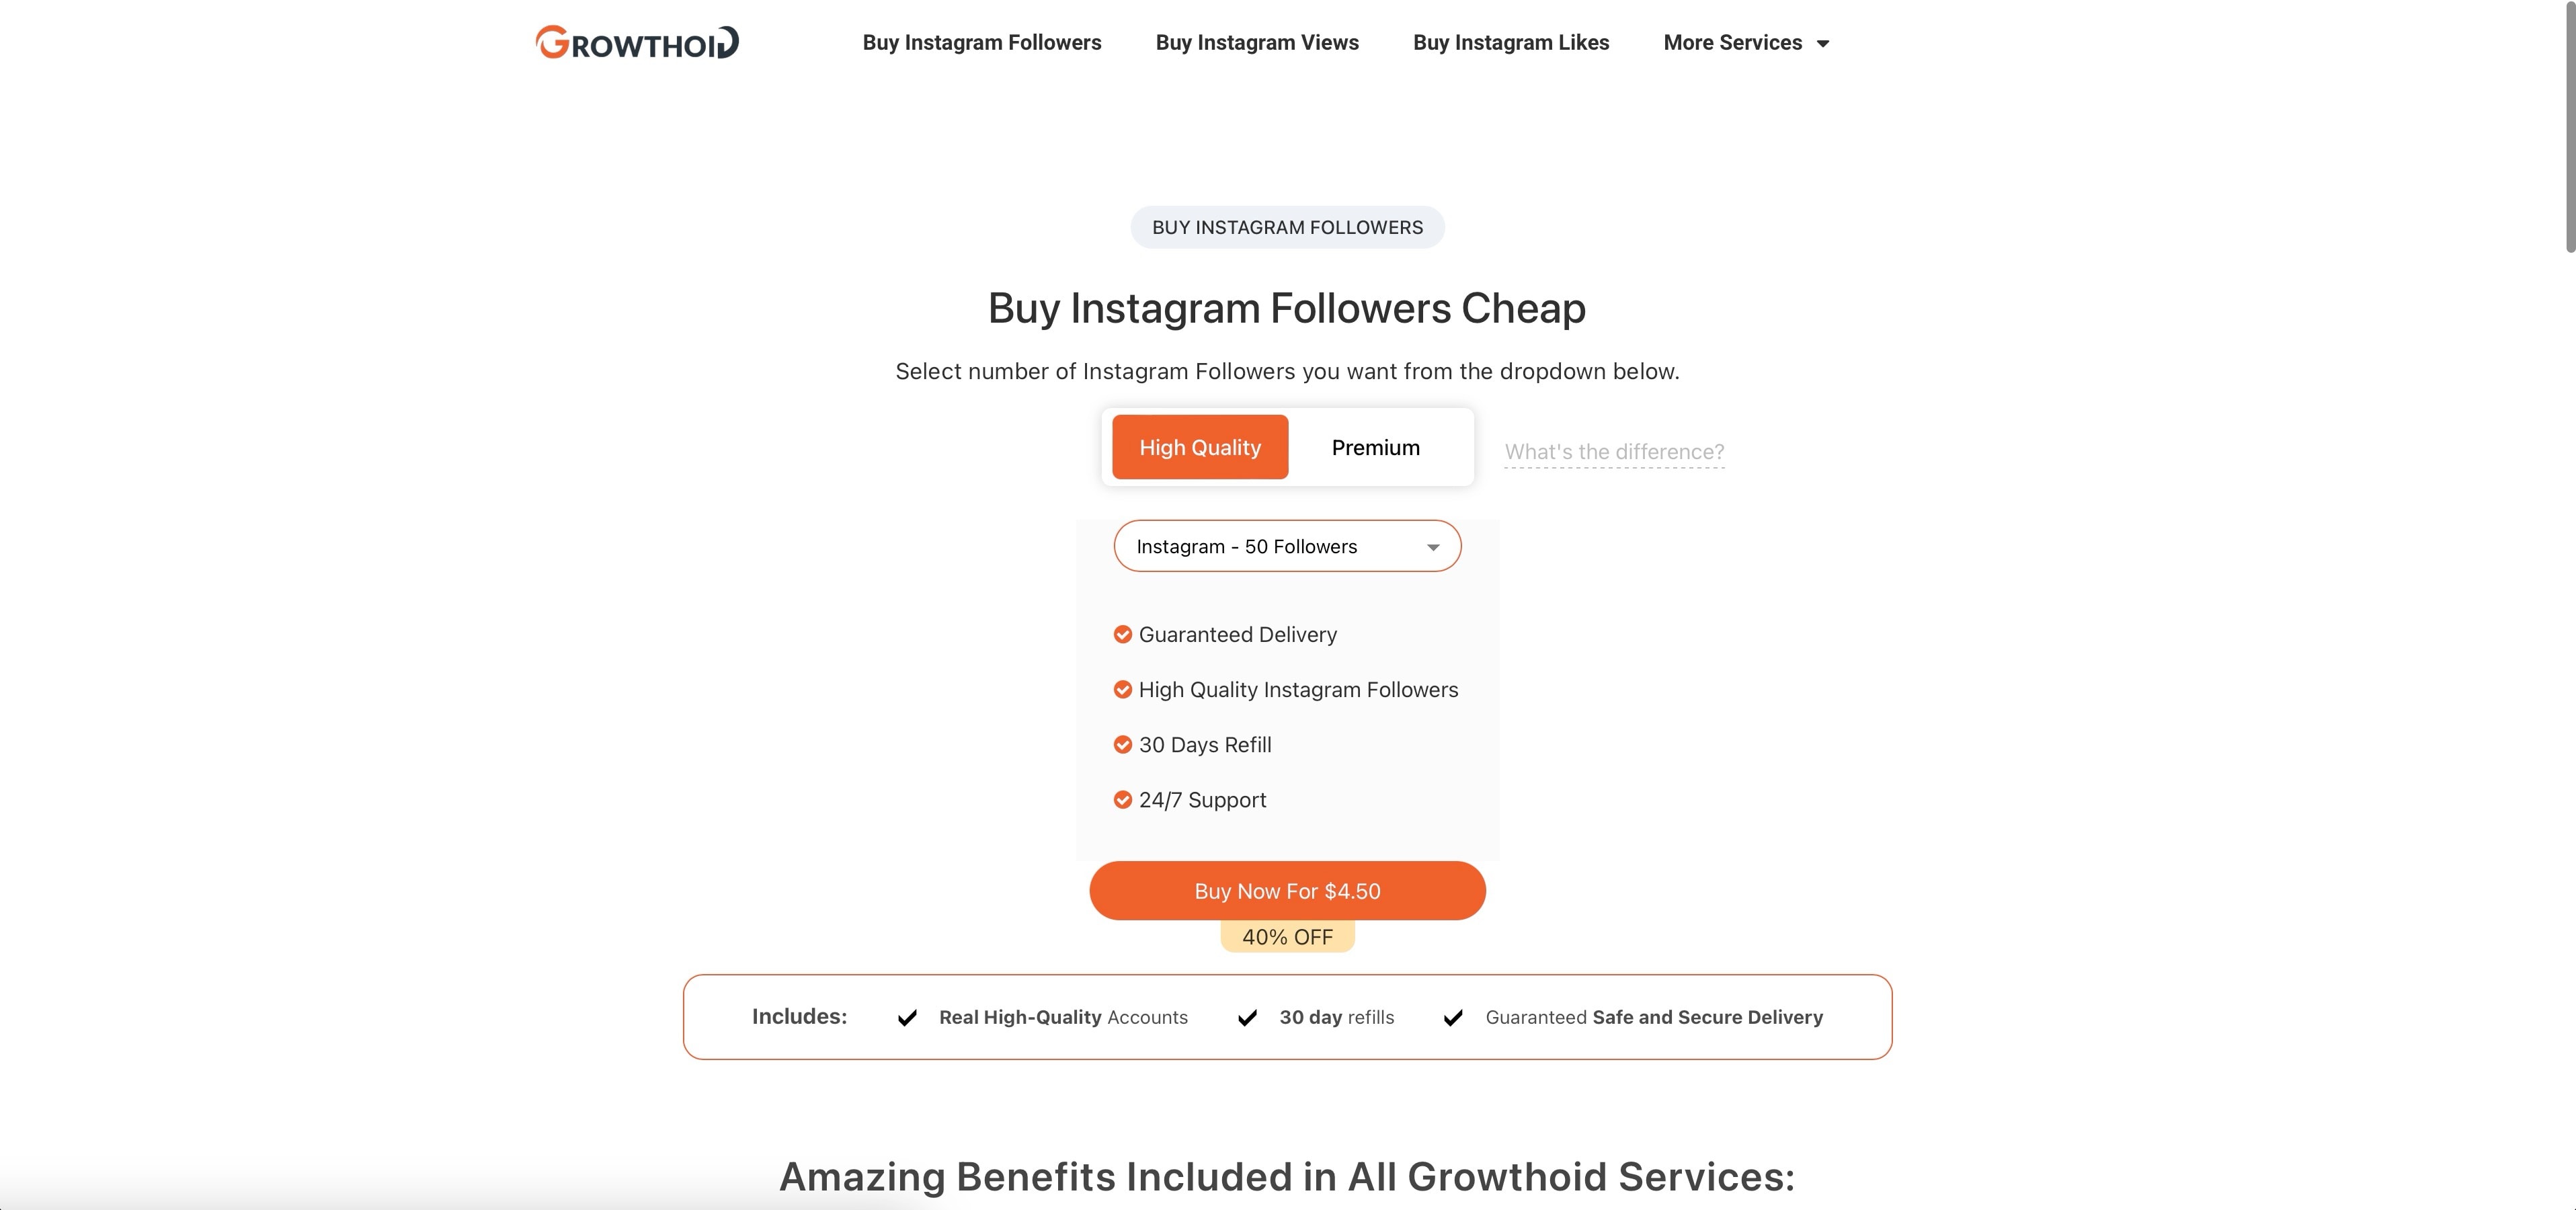 growthoid buy instagram followers italy page